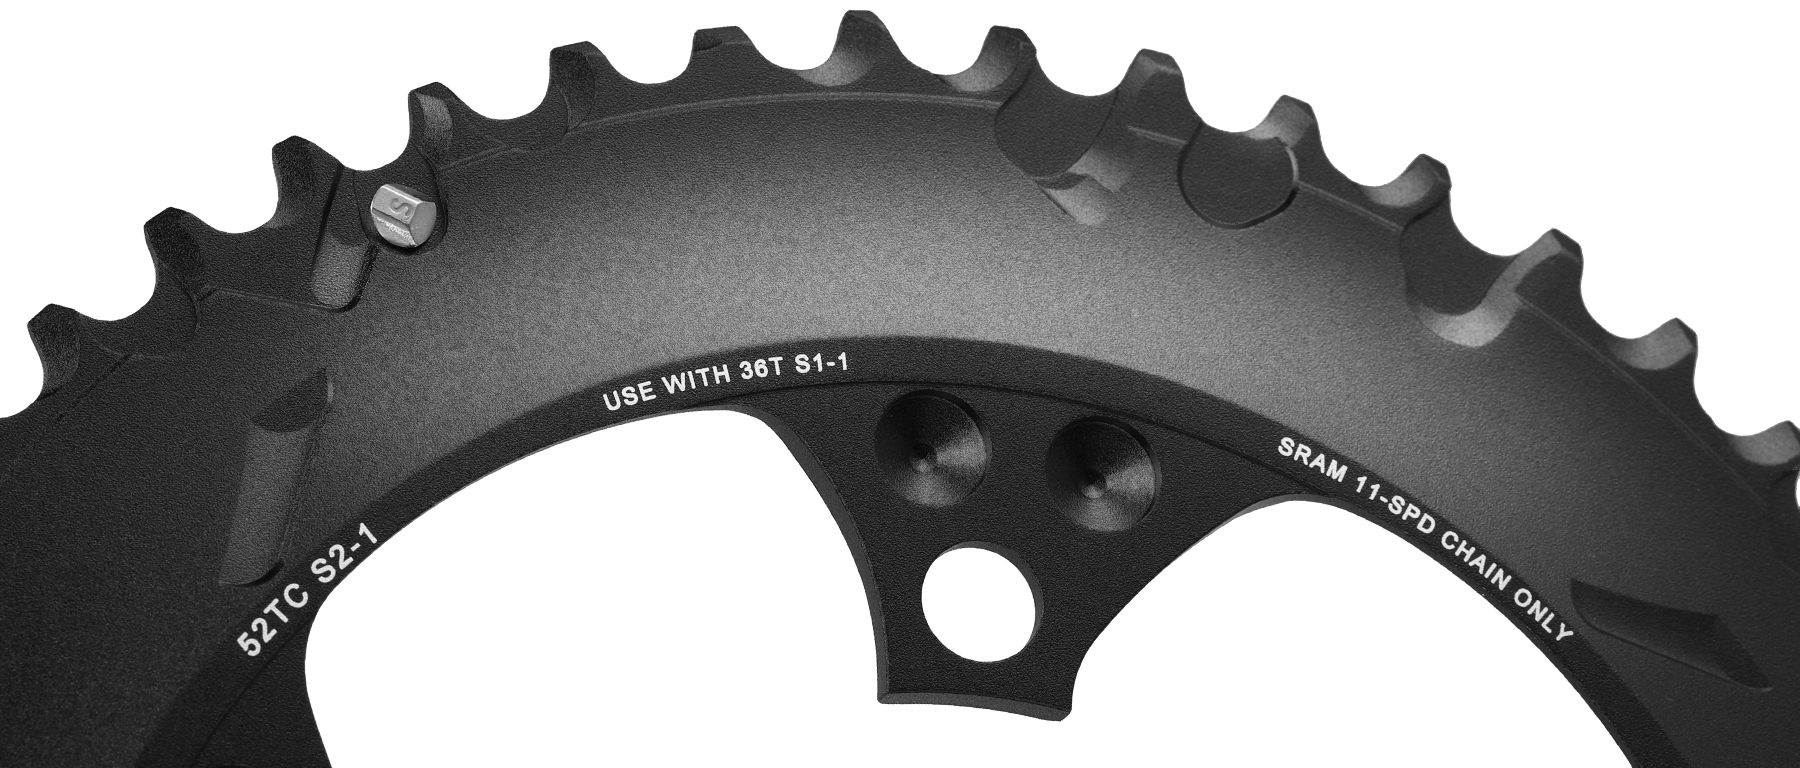 SRAM Force 22 X-Glide 11-Speed Outer Chainring